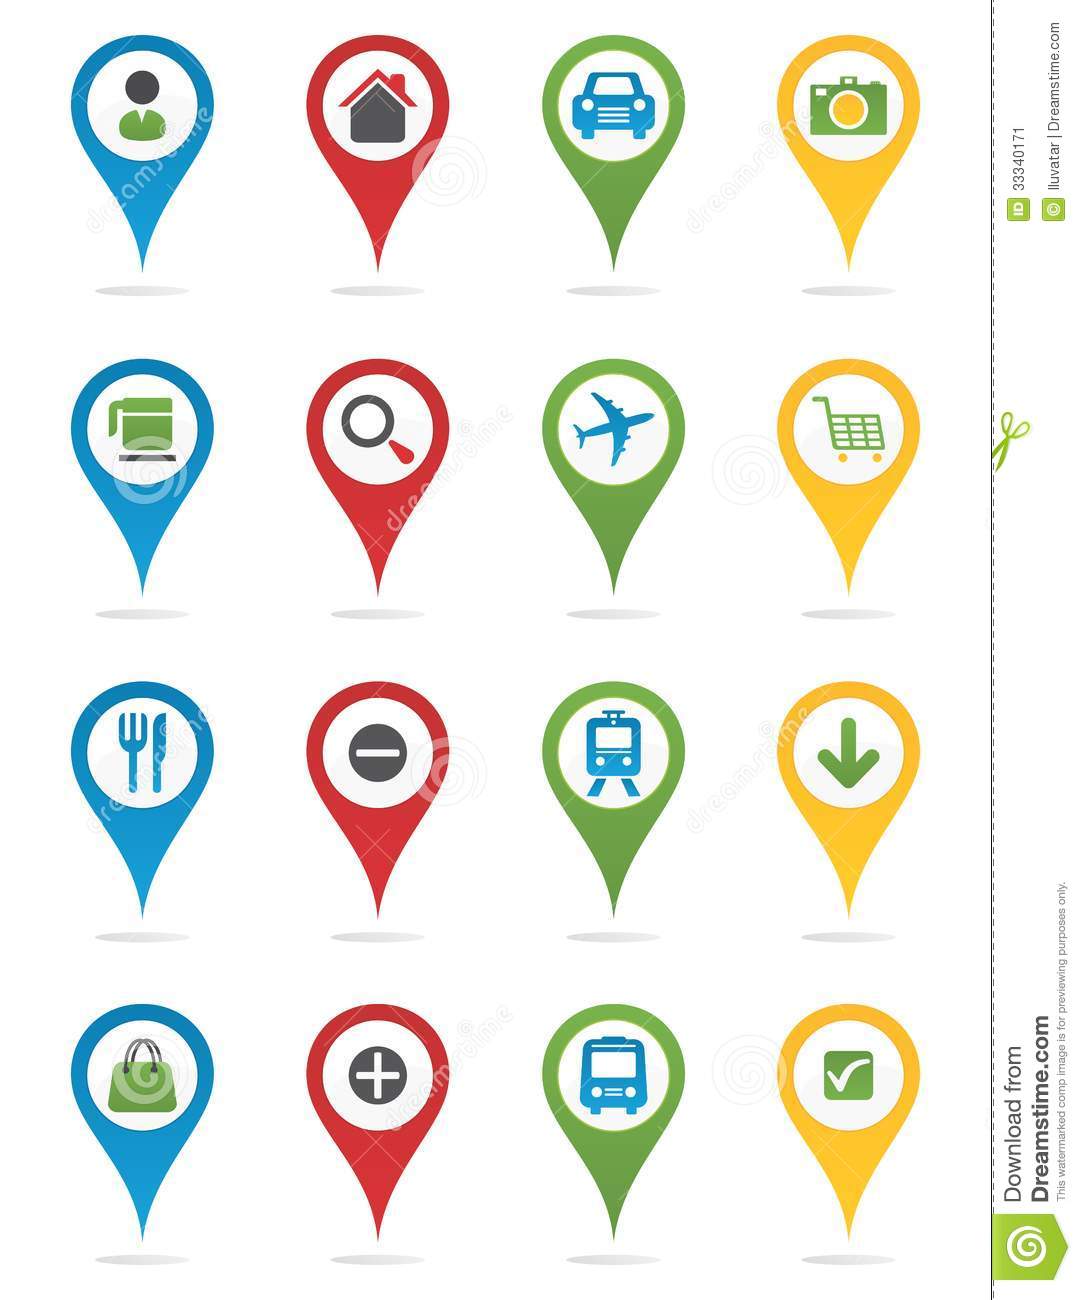 Google Map Icon   Clipart Panda   Free Clipart Images